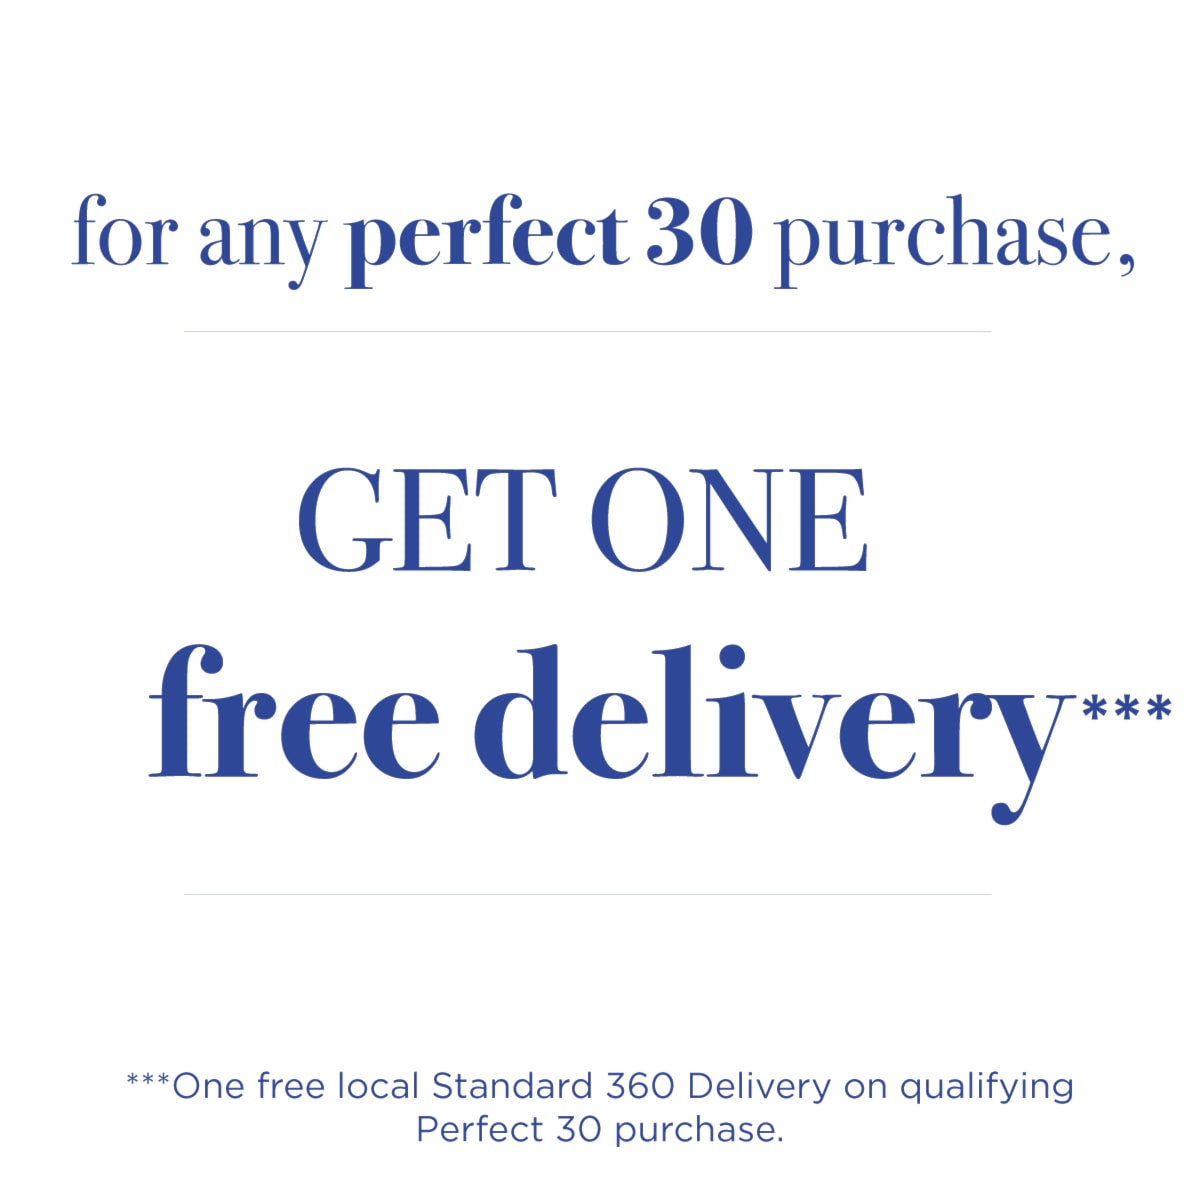 For any perfect 30 purchase, get one free delivery***|***One free local Standard 360 Delivery on qualifying Perfect 30 purchase